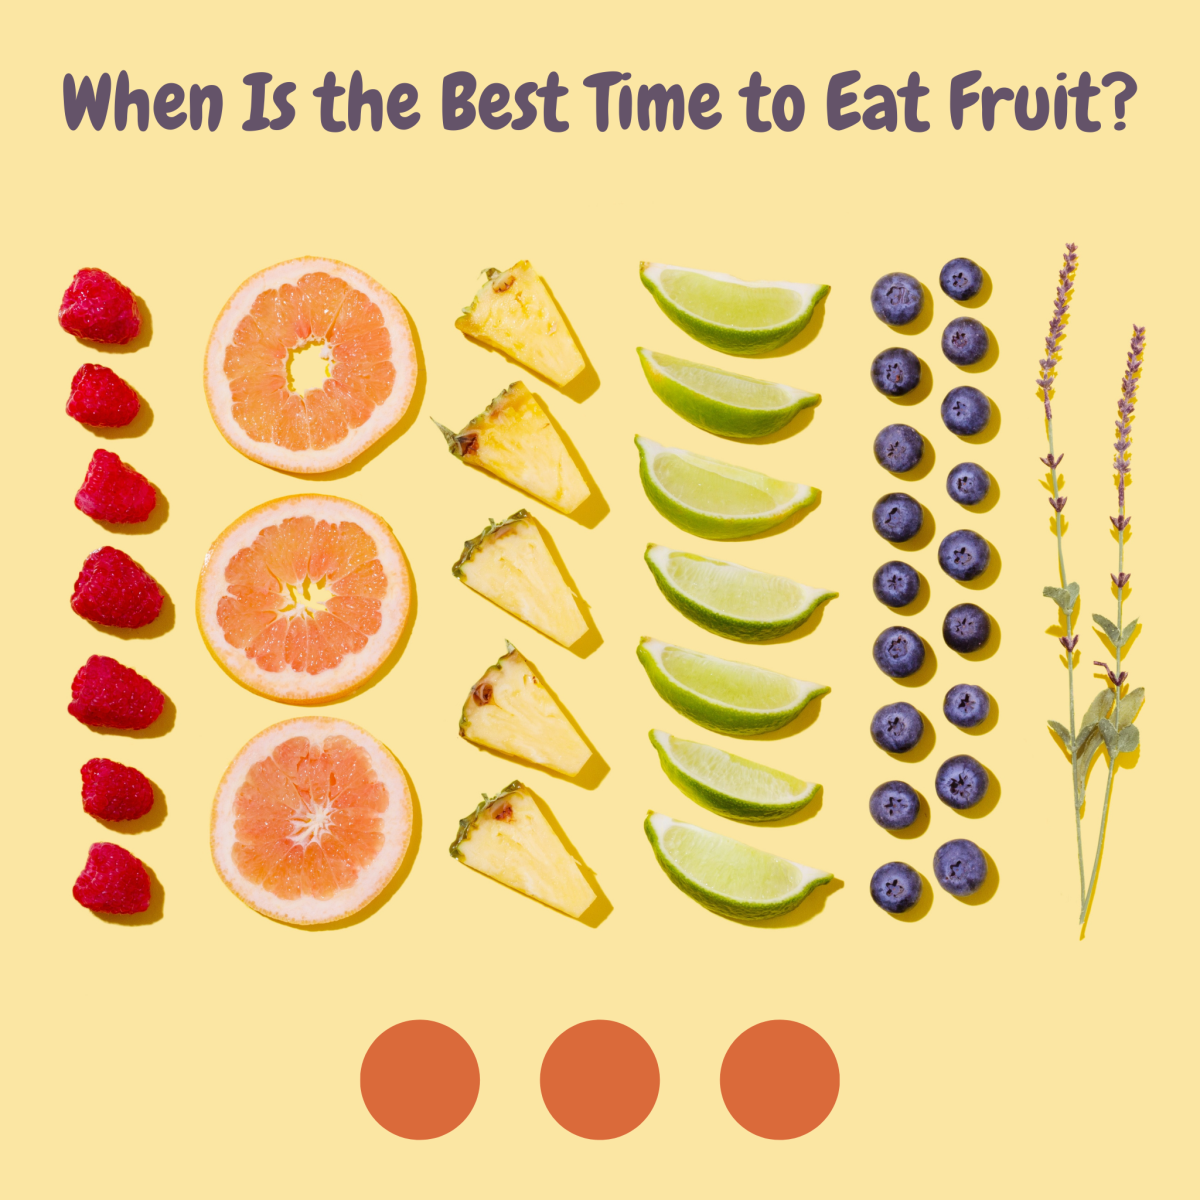 When Is the Best Time to Eat Fruit?